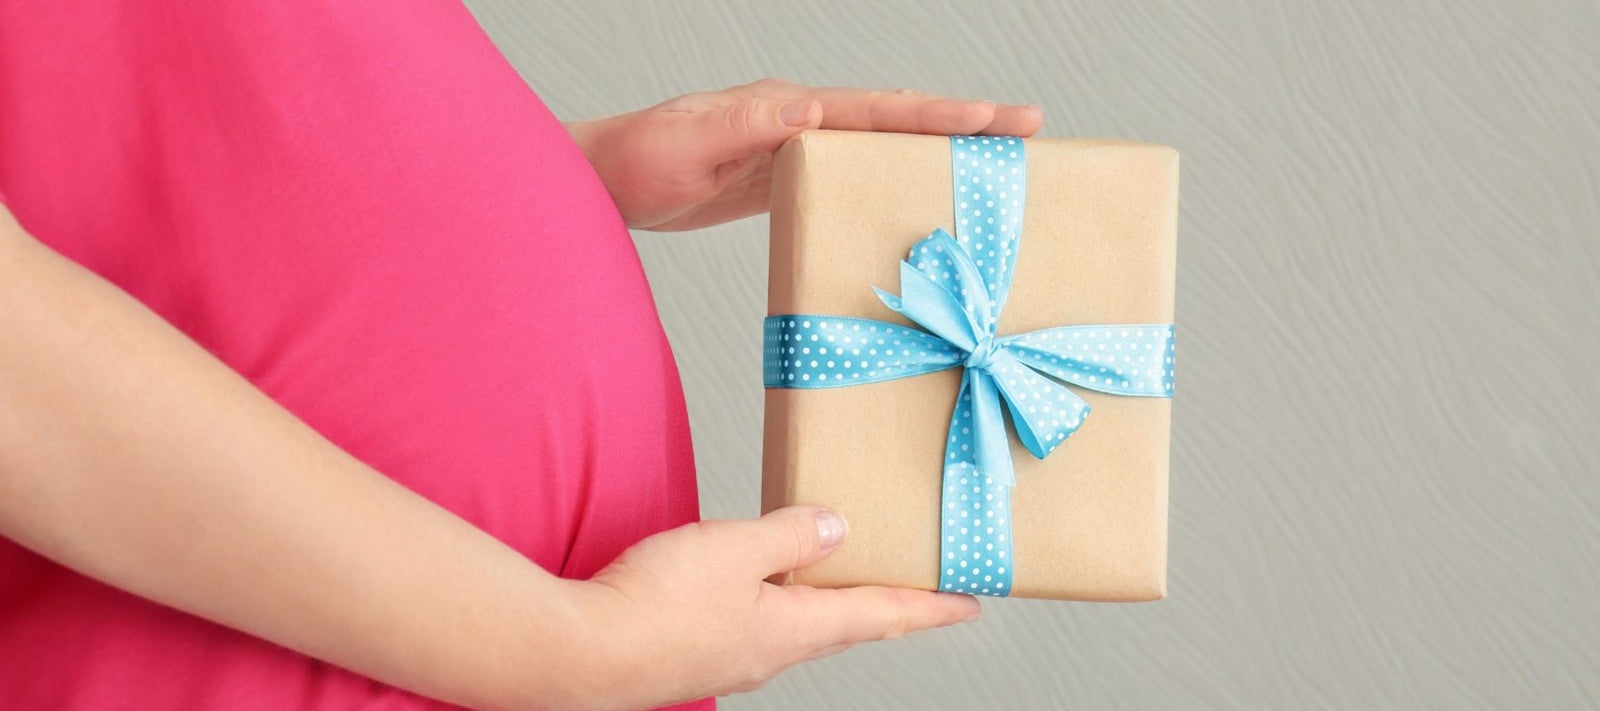 What Do You Buy For A Baby Shower Gift?